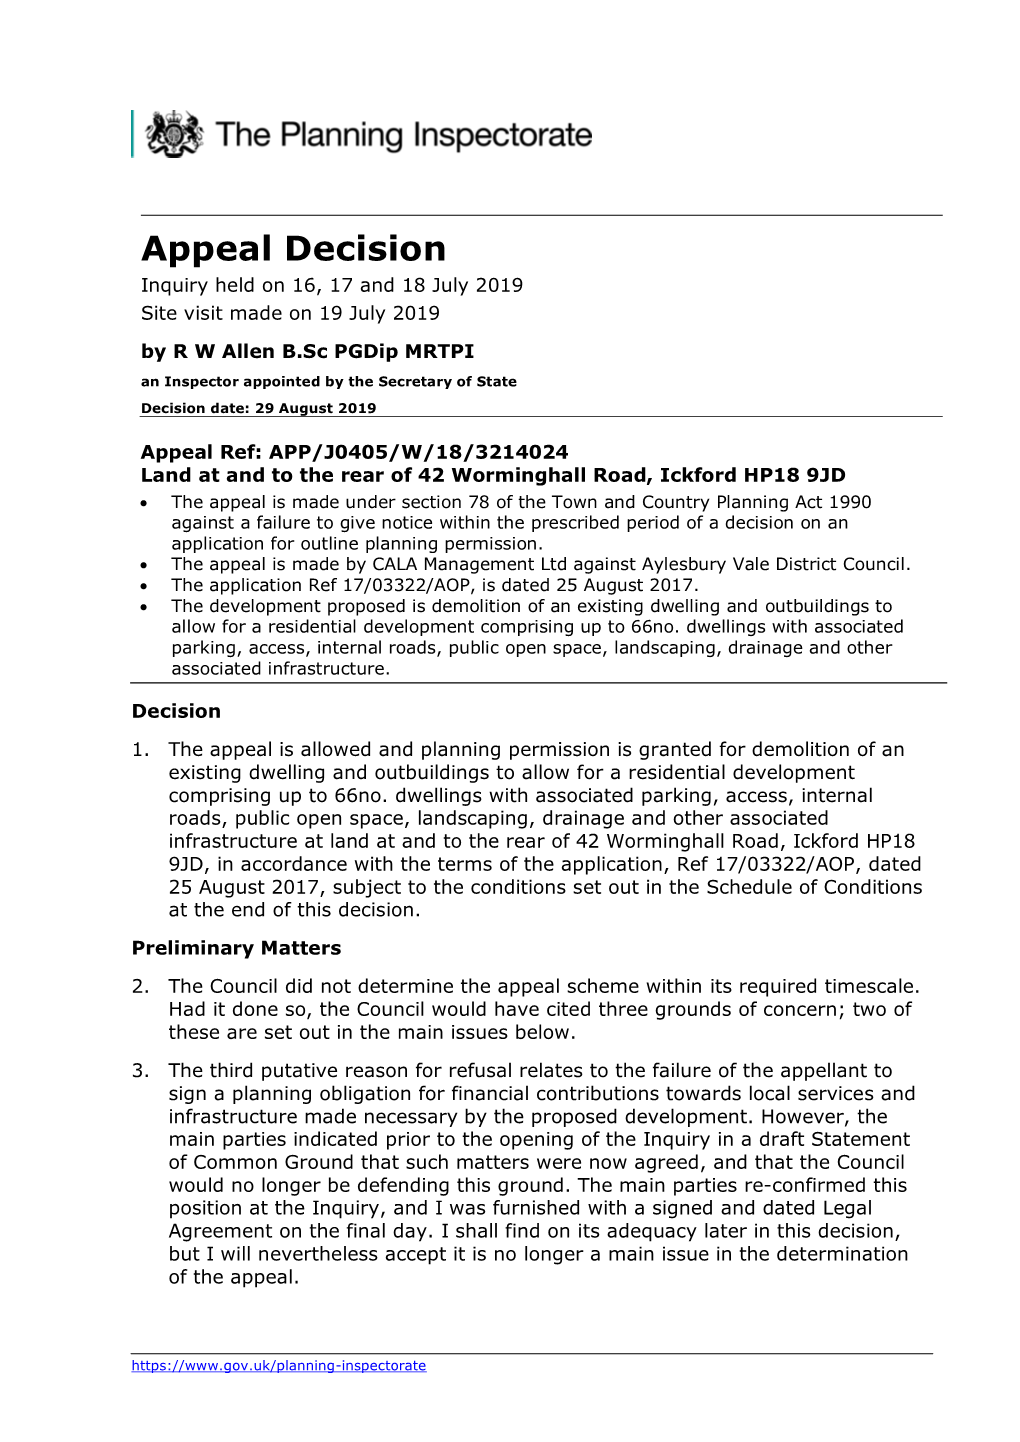 Appeal Decision Inquiry Held on 16, 17 and 18 July 2019 Site Visit Made on 19 July 2019